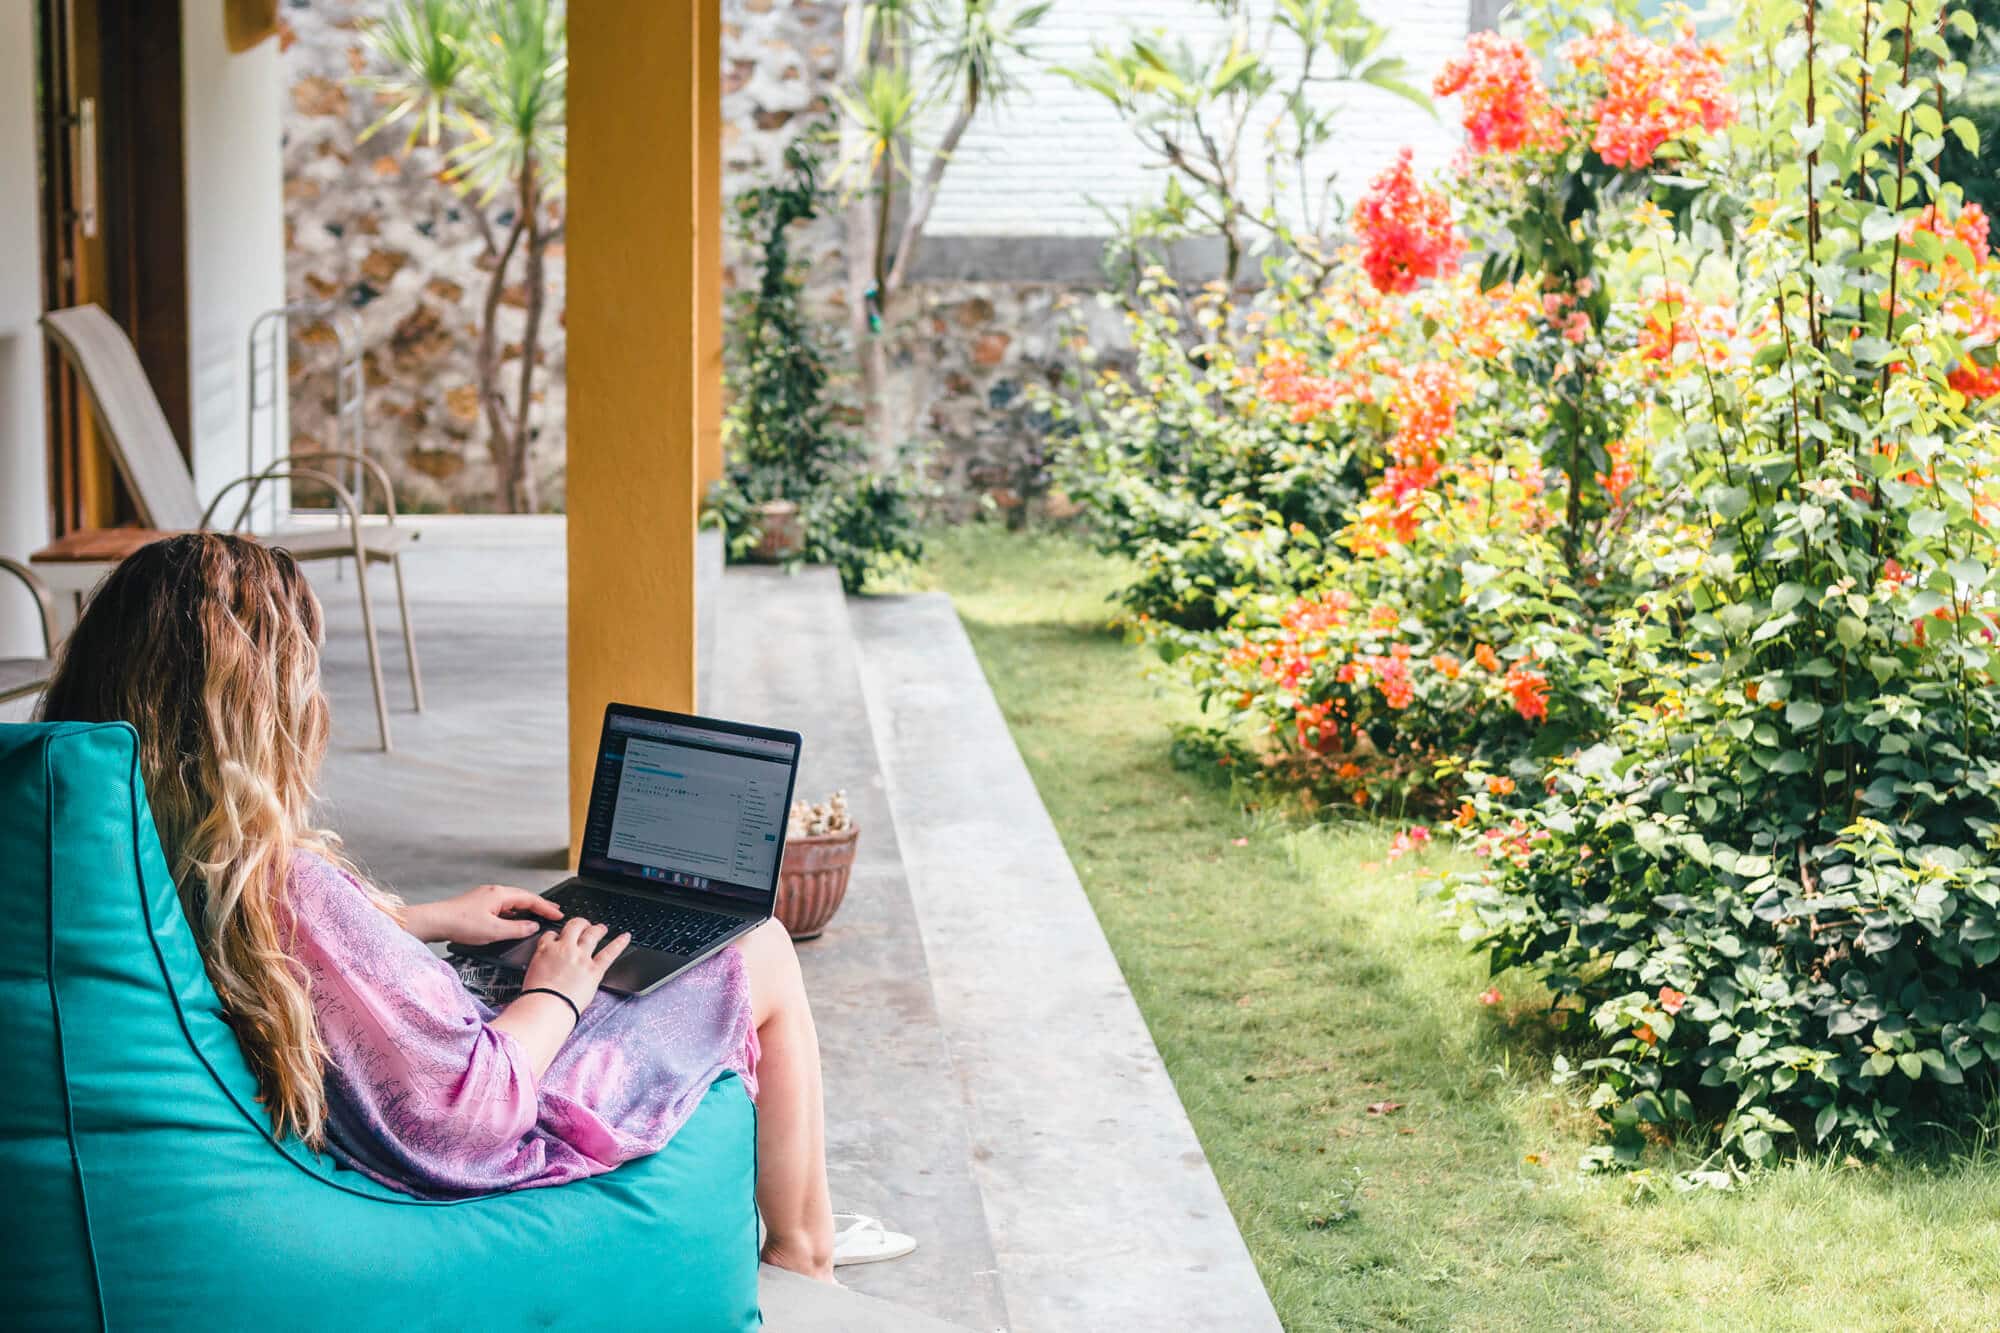 Making money online as a blogger and travel content creator while living in Lombok